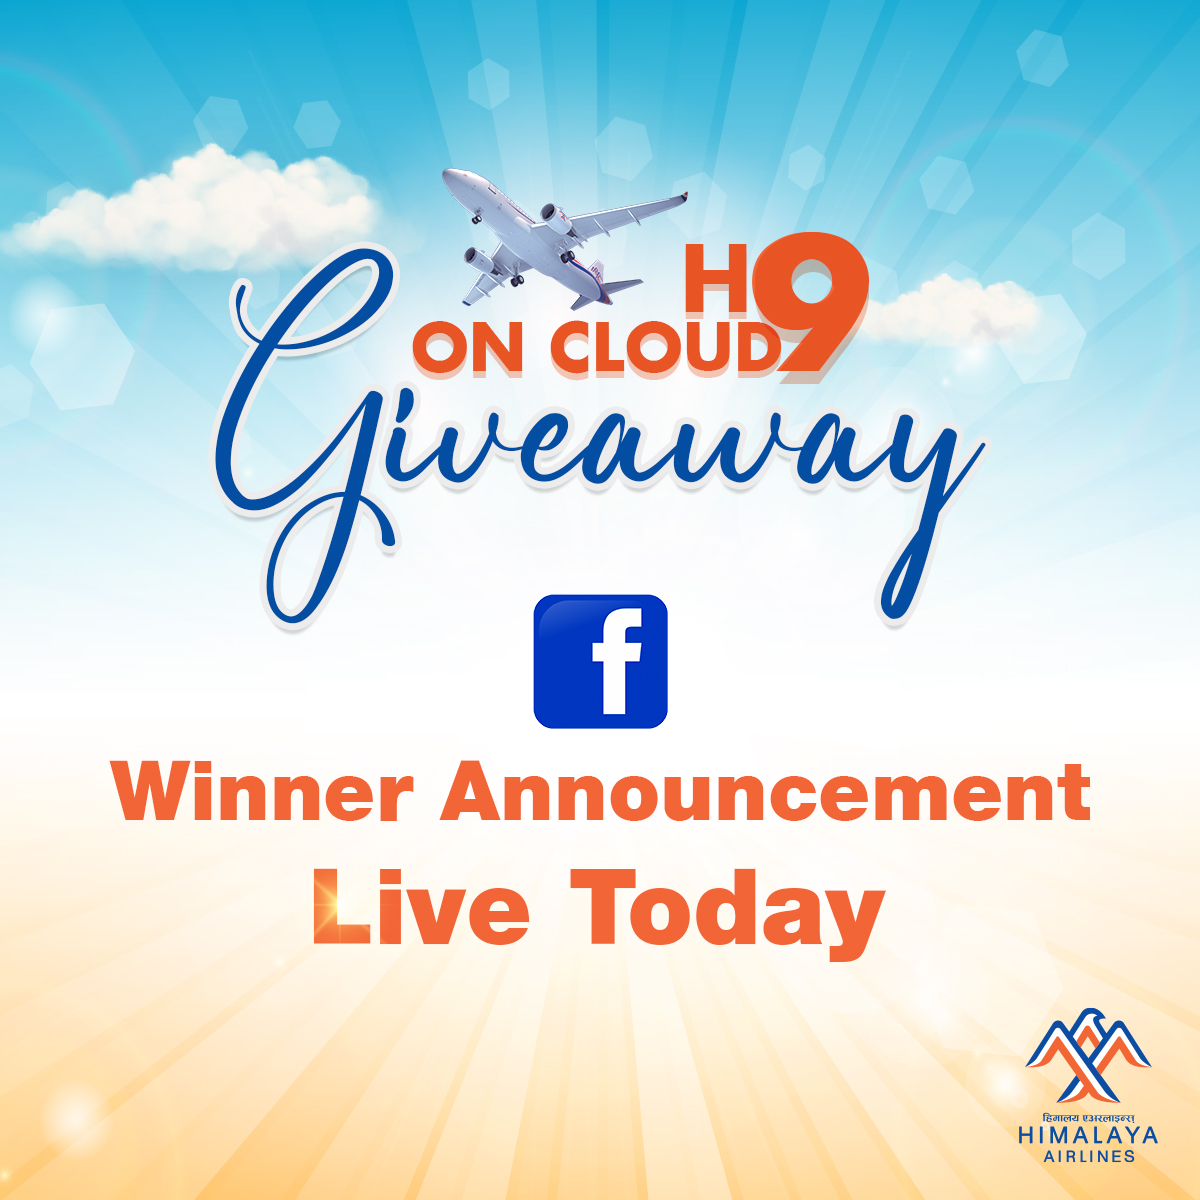 FACEBOOK LUCKY DRAW LIVE ANNOUNCEMENT TODAY!
STAY TUNED!
📷 “H9 on Cloud9 Giveaway!” 📷
📷 Celebrating 9 Years in the skies with H9 Giveaway! 📷
📷 Grand Prize: Free Roundtrip Ticket to Kuala Lumpur, Malaysia
📷 10 Lucky winners shall get attractive H9 gift hamper